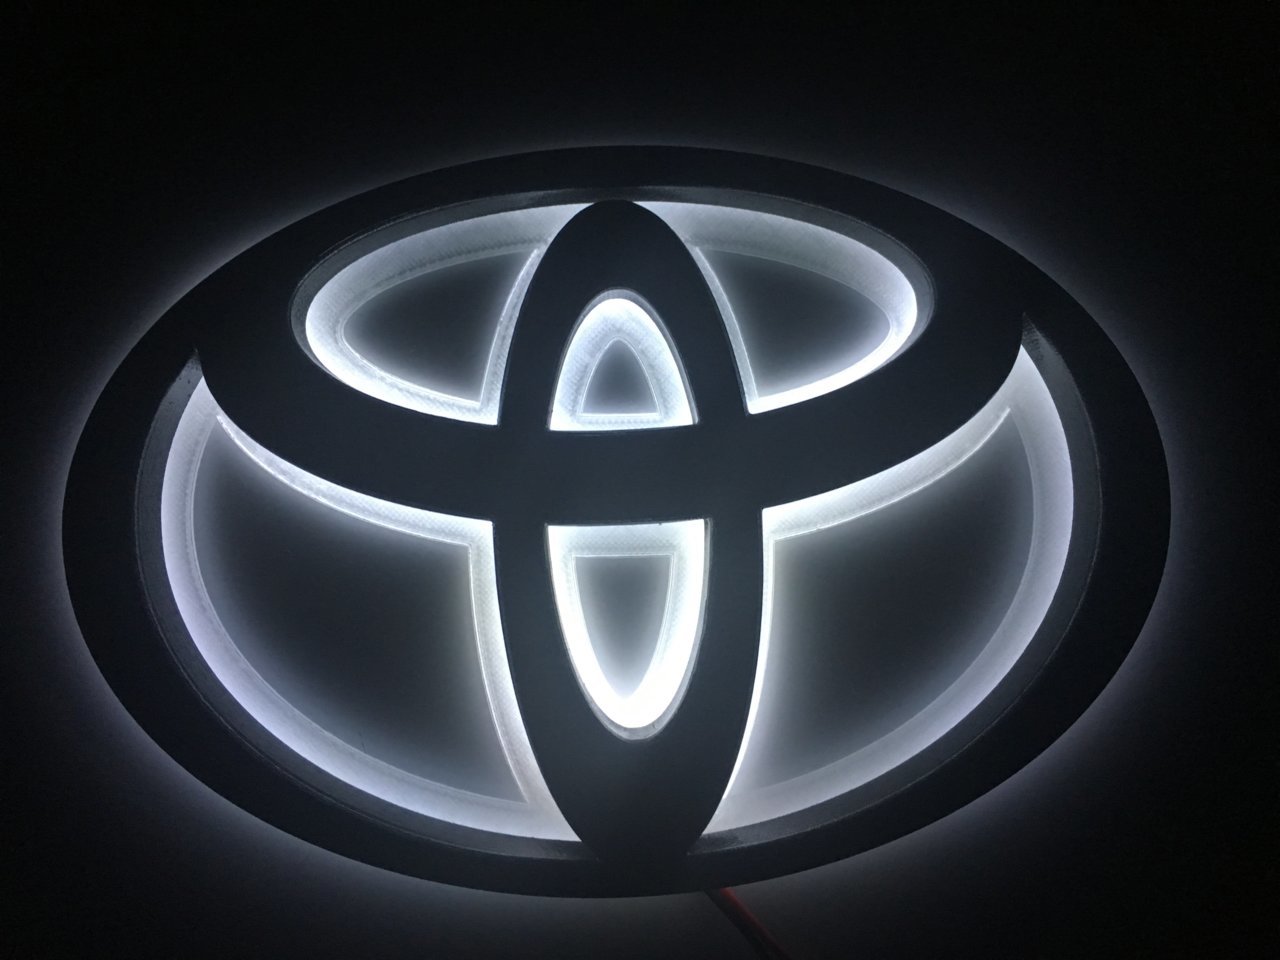 Backlit logo for stock grill | Toyota Tundra Forum